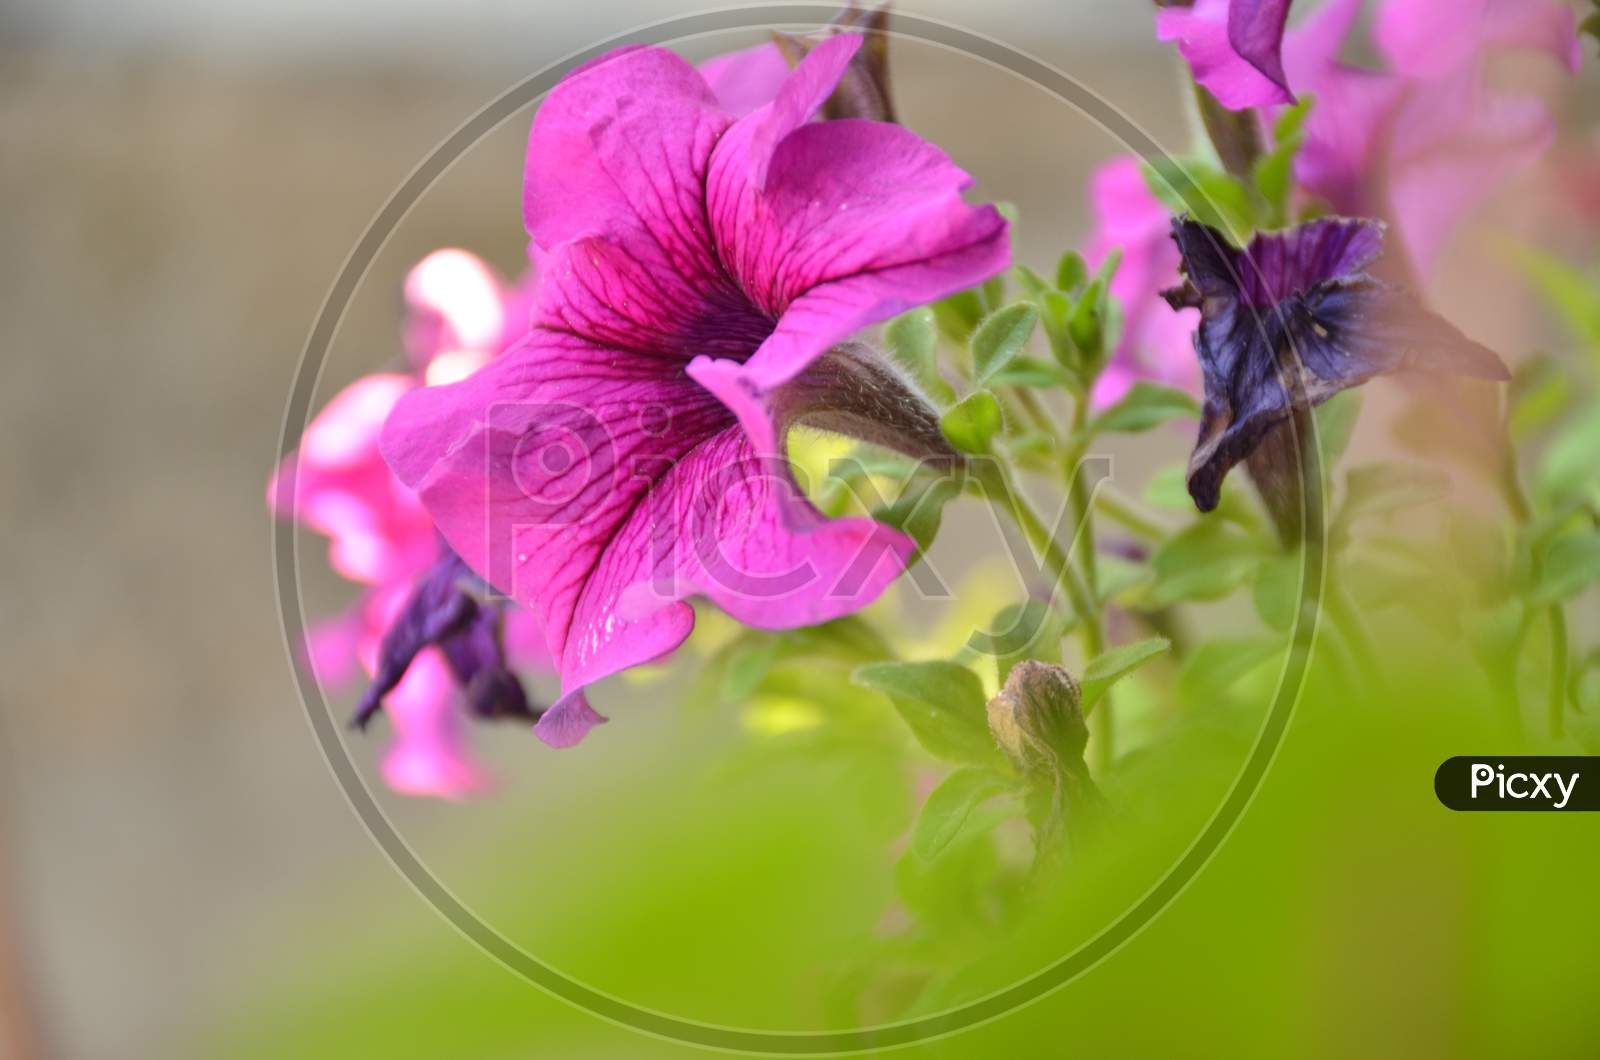 the purple flower of petunia with green leaves.